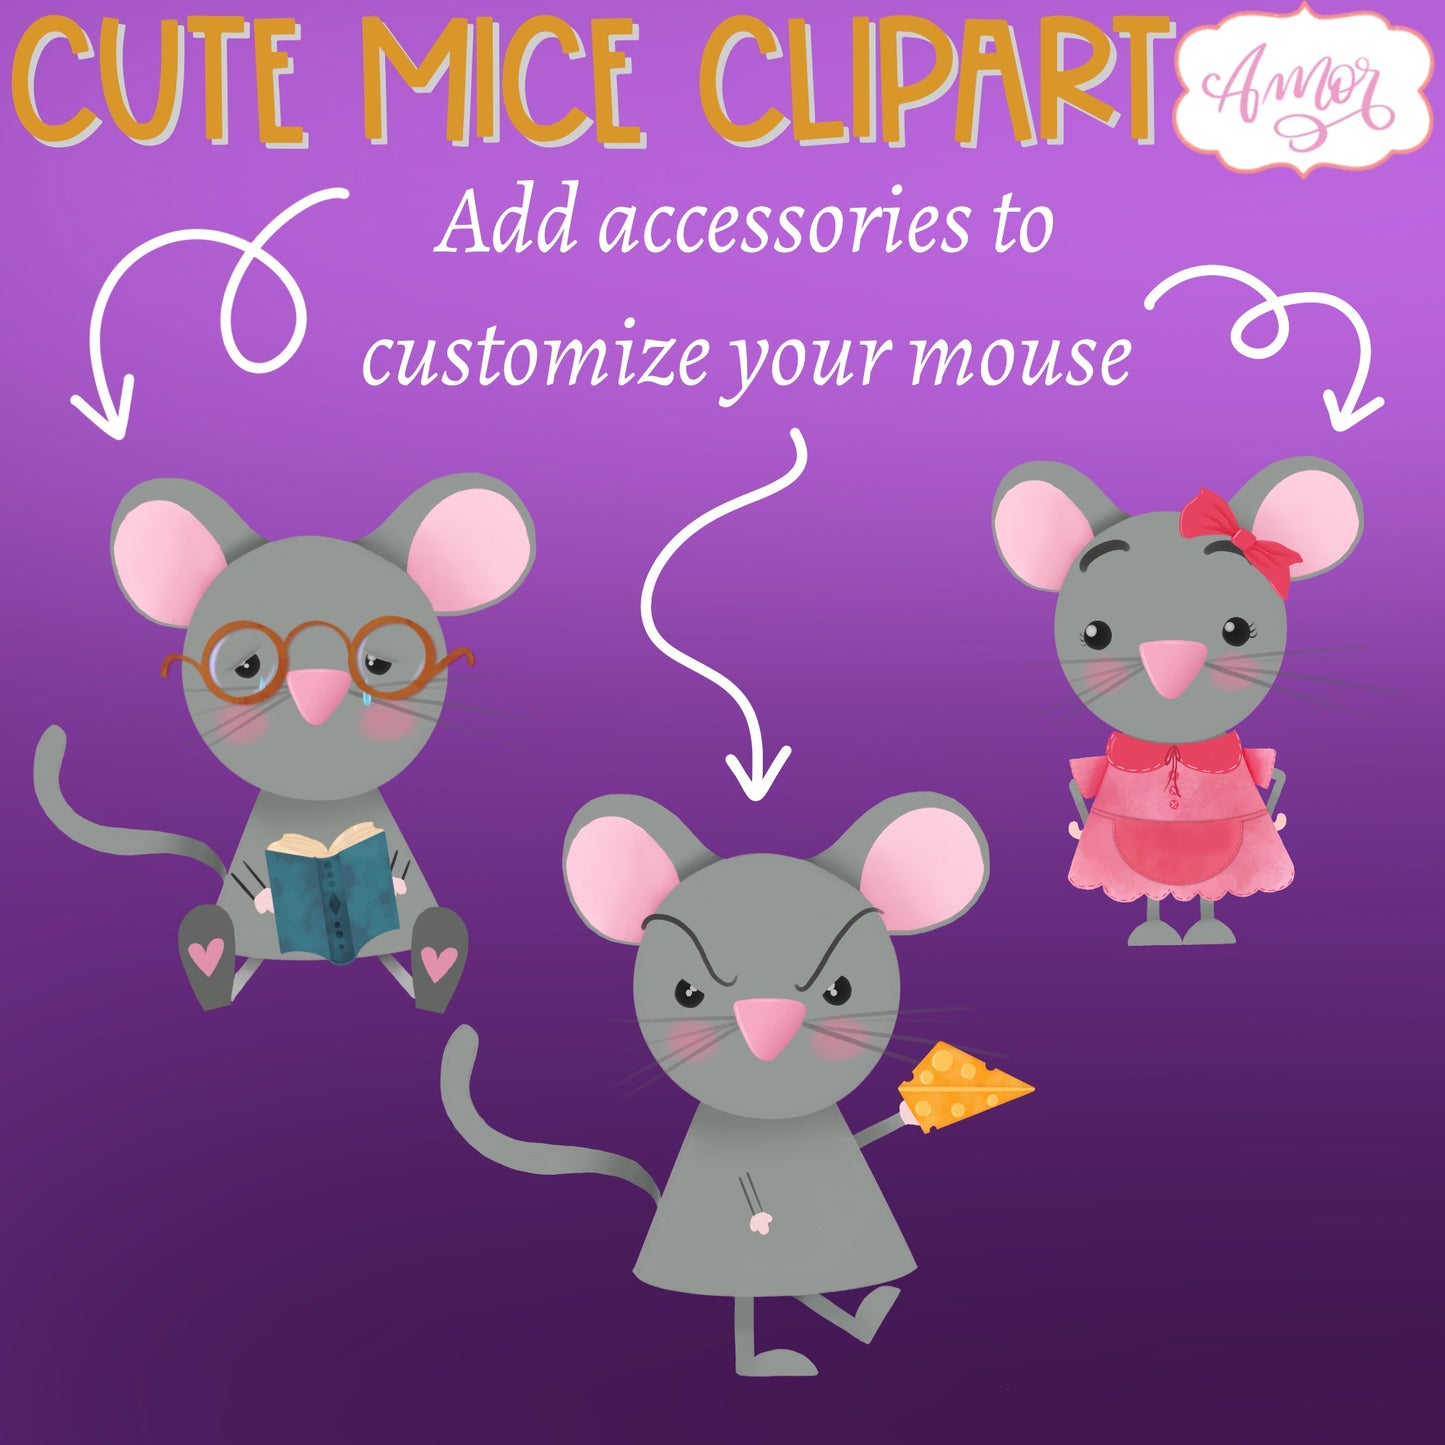 Cute mouse clipart with different emotions and accessories